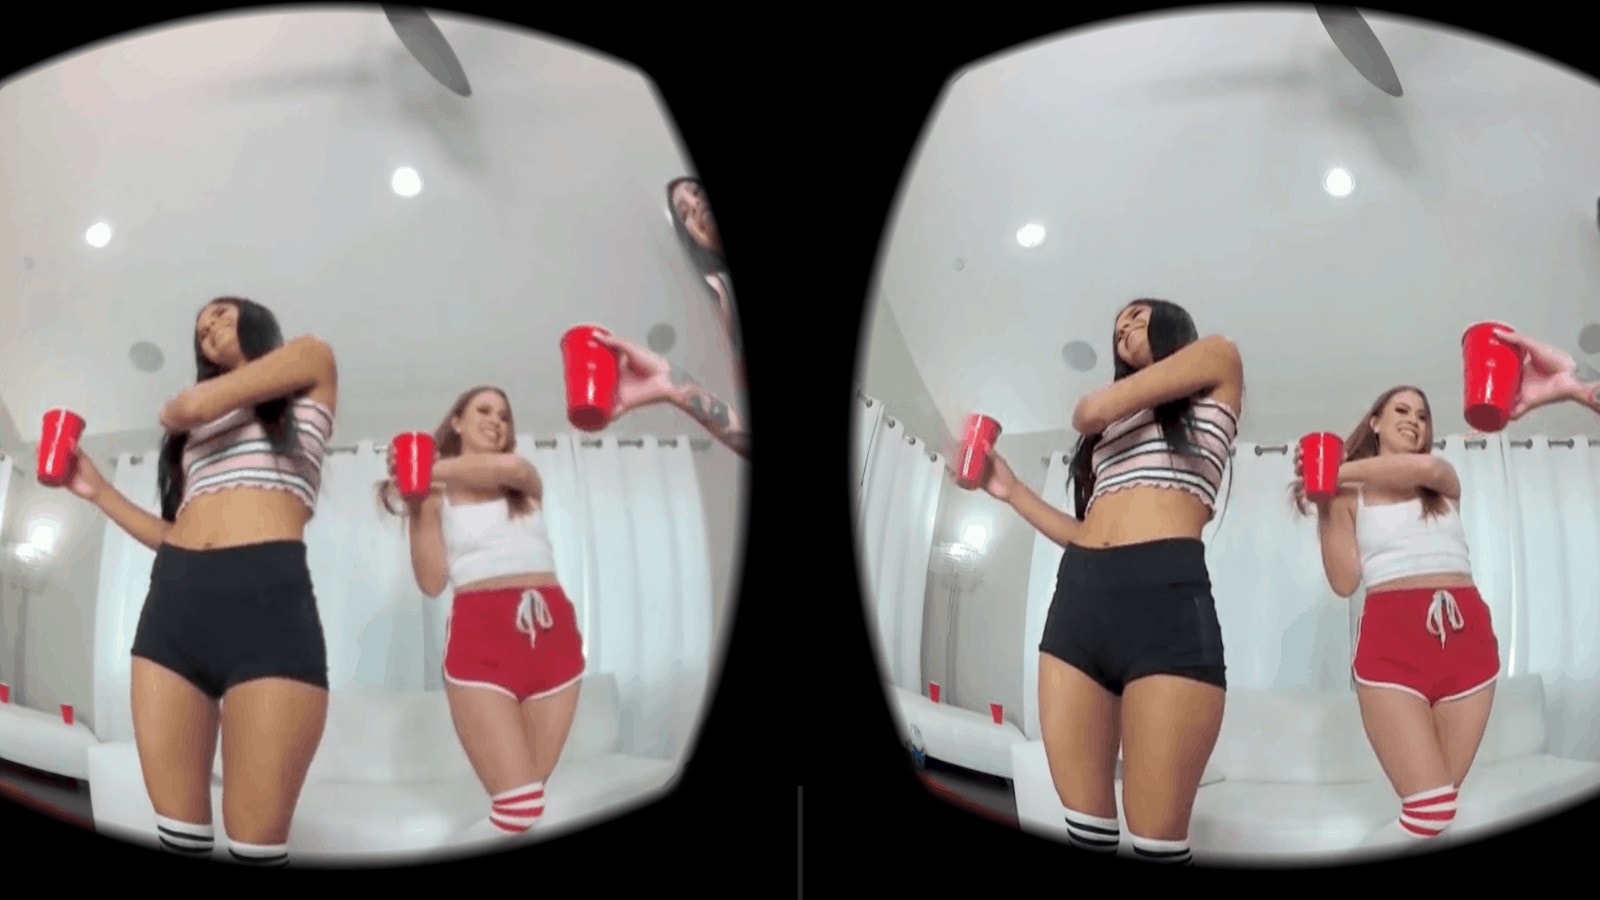 Two girls are playing a VR game.